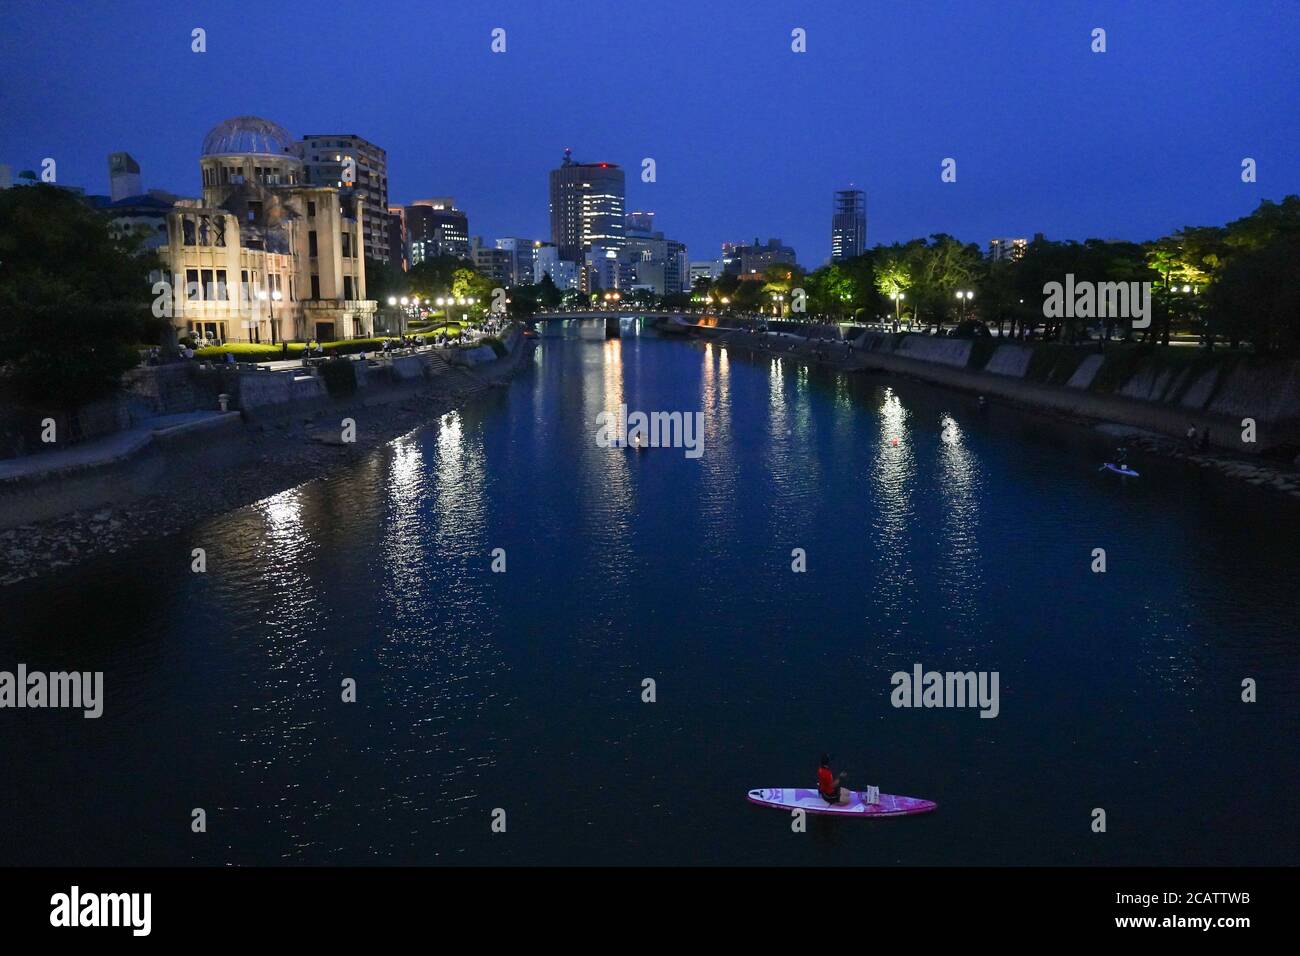 Hiroshima, Japan. 6th Aug, 2020. A view of the scaled down lantern ceremony along the Motoyasu River at night.Hiroshima will mark the 75th anniversary of the atomic bombing which killed about 150,000 people and destroyed the entire city for the first bombing with a nuclear weapon in war. Credit: Jinhee Lee/SOPA Images/ZUMA Wire/Alamy Live News Stock Photo